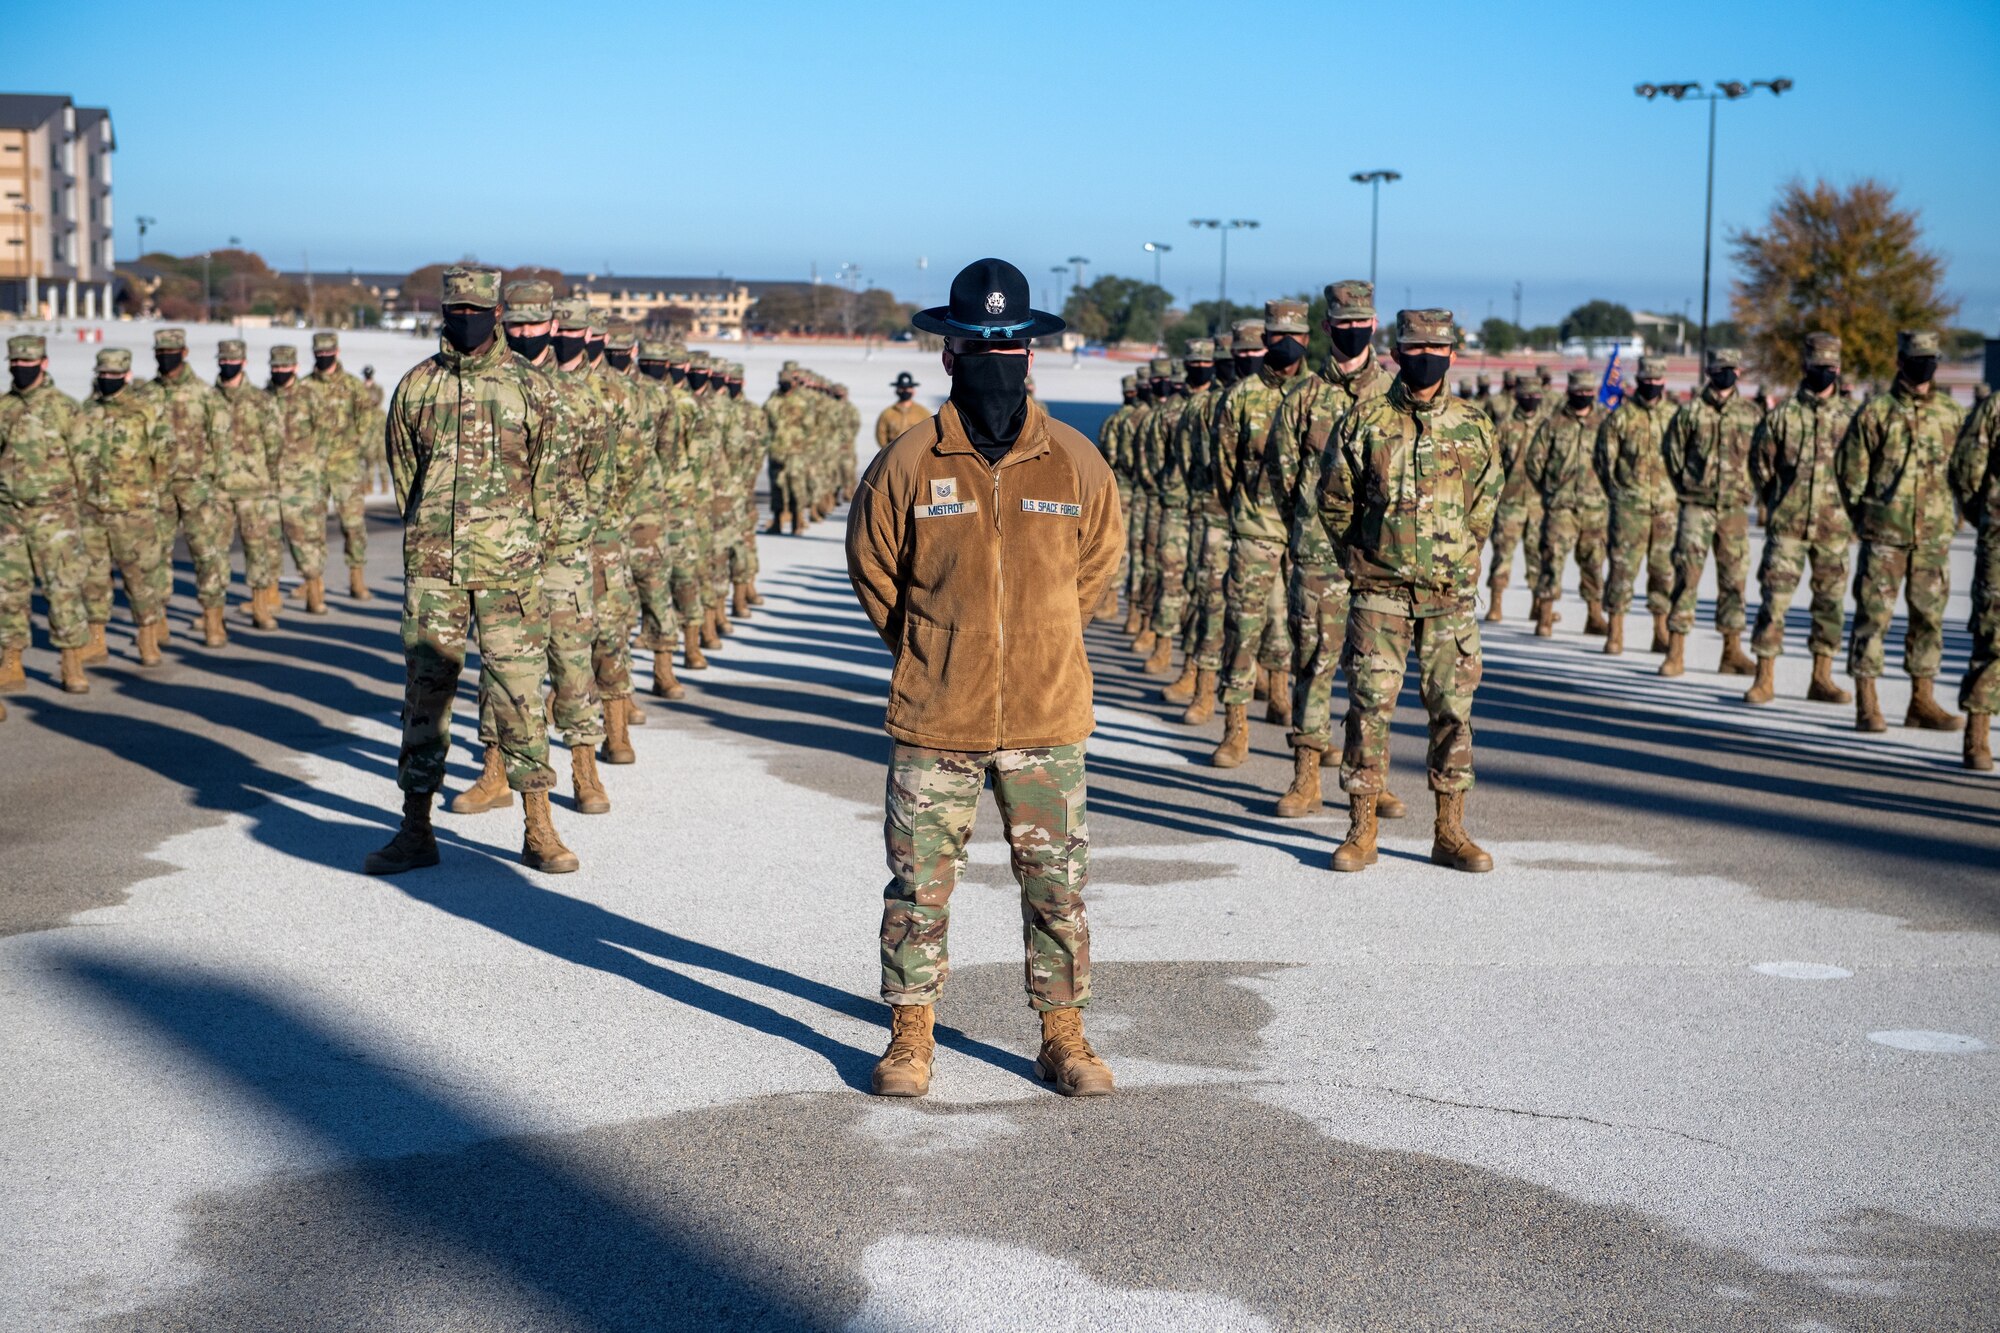 JOINT BASE SAN ANTONIO-LACKLAND, Texas -- History was made here Dec. 10, as the first seven people to enlist directly into the U.S. Space Force graduated from Basic Military Training.